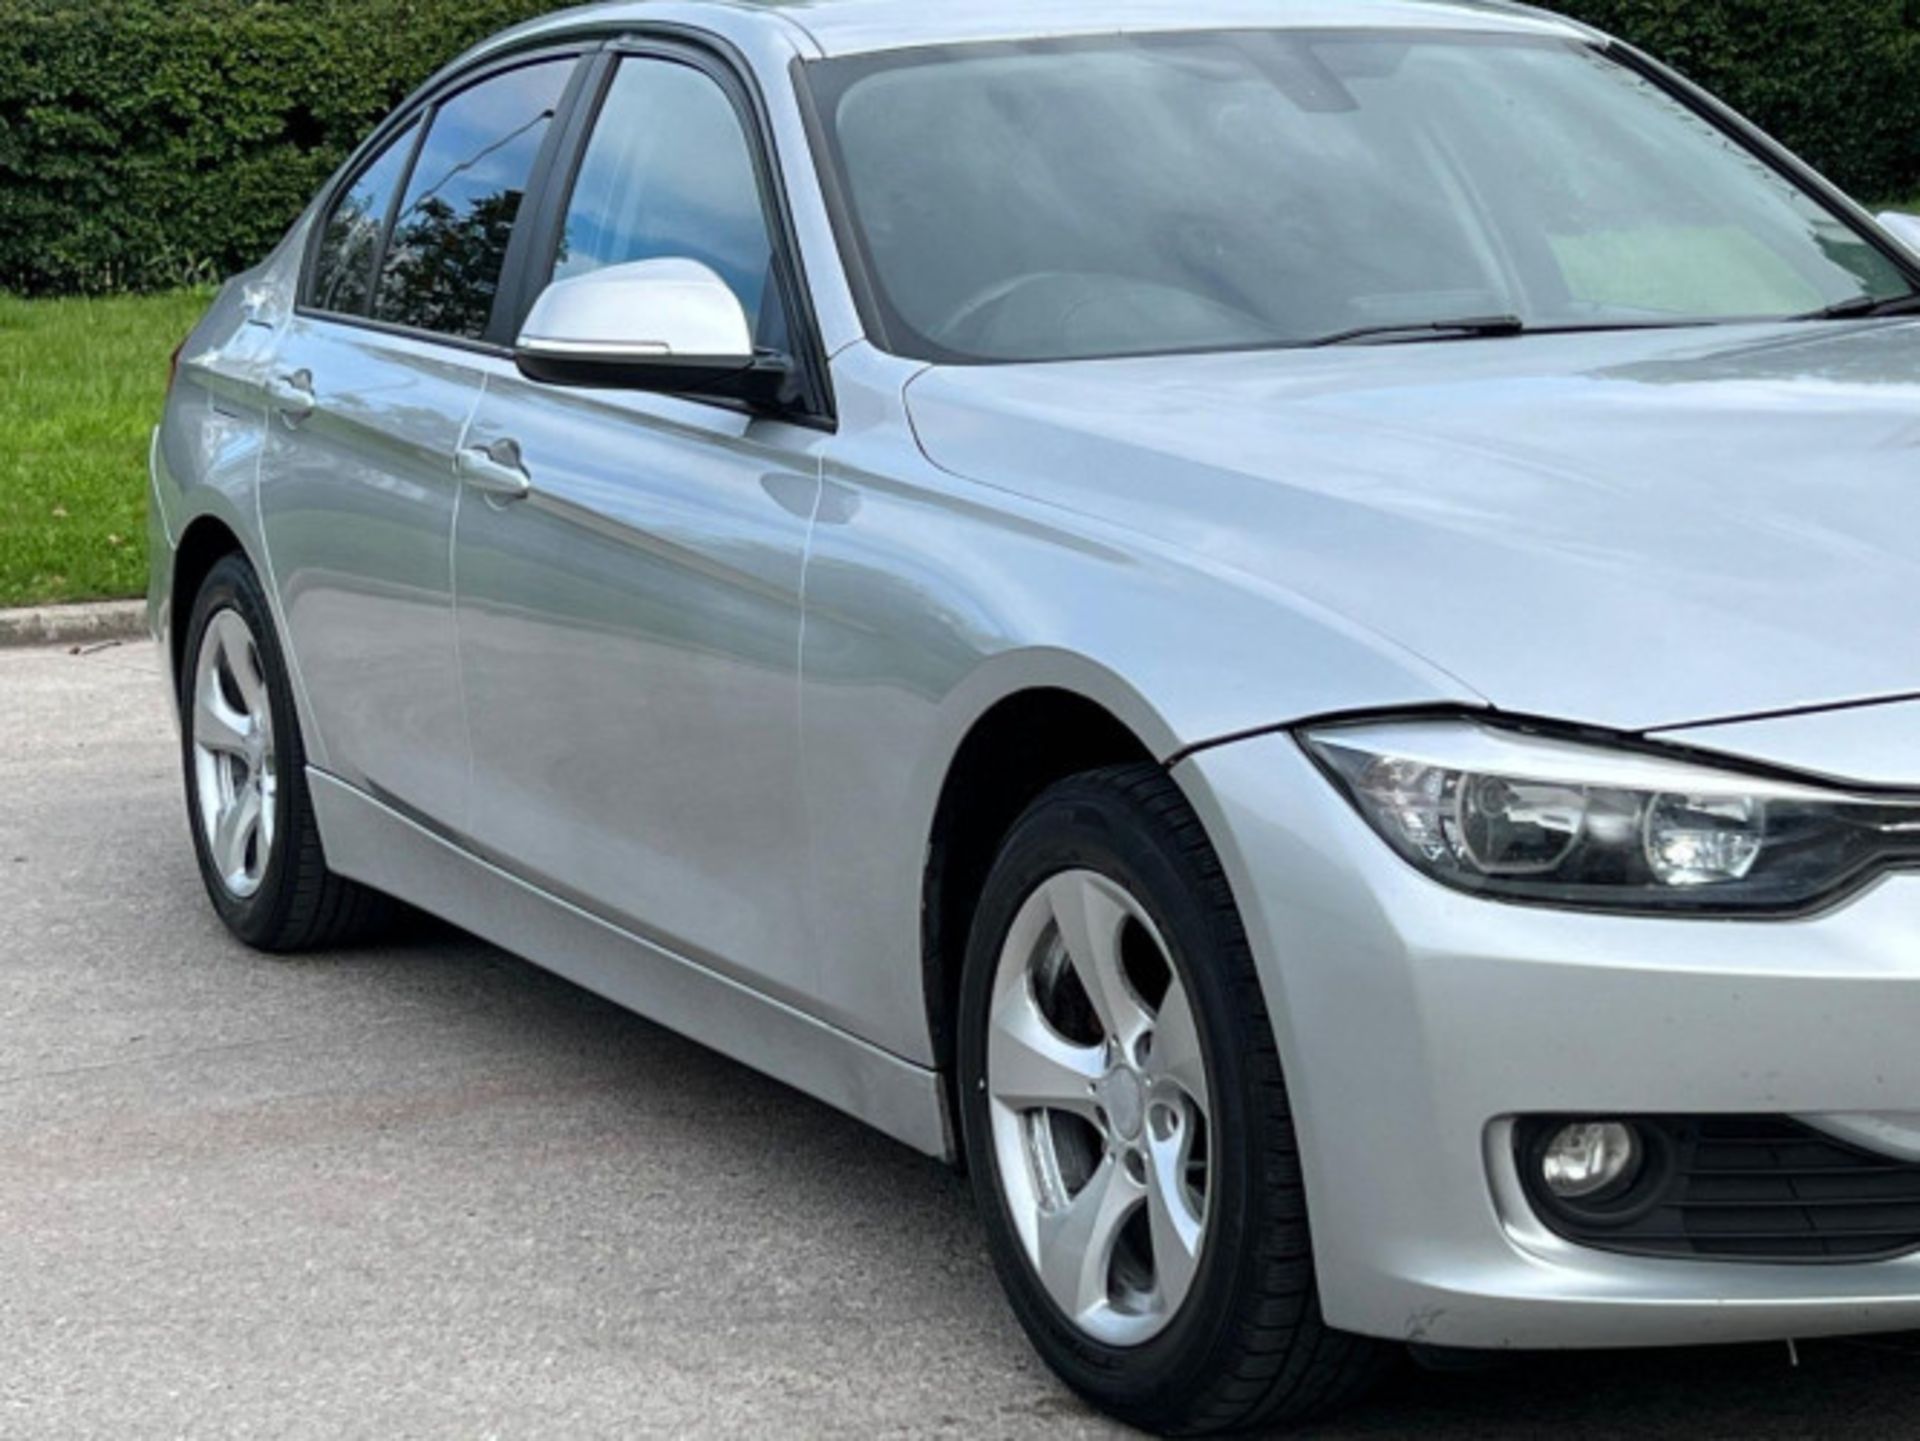 BMW 3 SERIES 2.0 DIESEL ED START STOP - A WELL-MAINTAINED GEM >>--NO VAT ON HAMMER--<< - Image 223 of 229